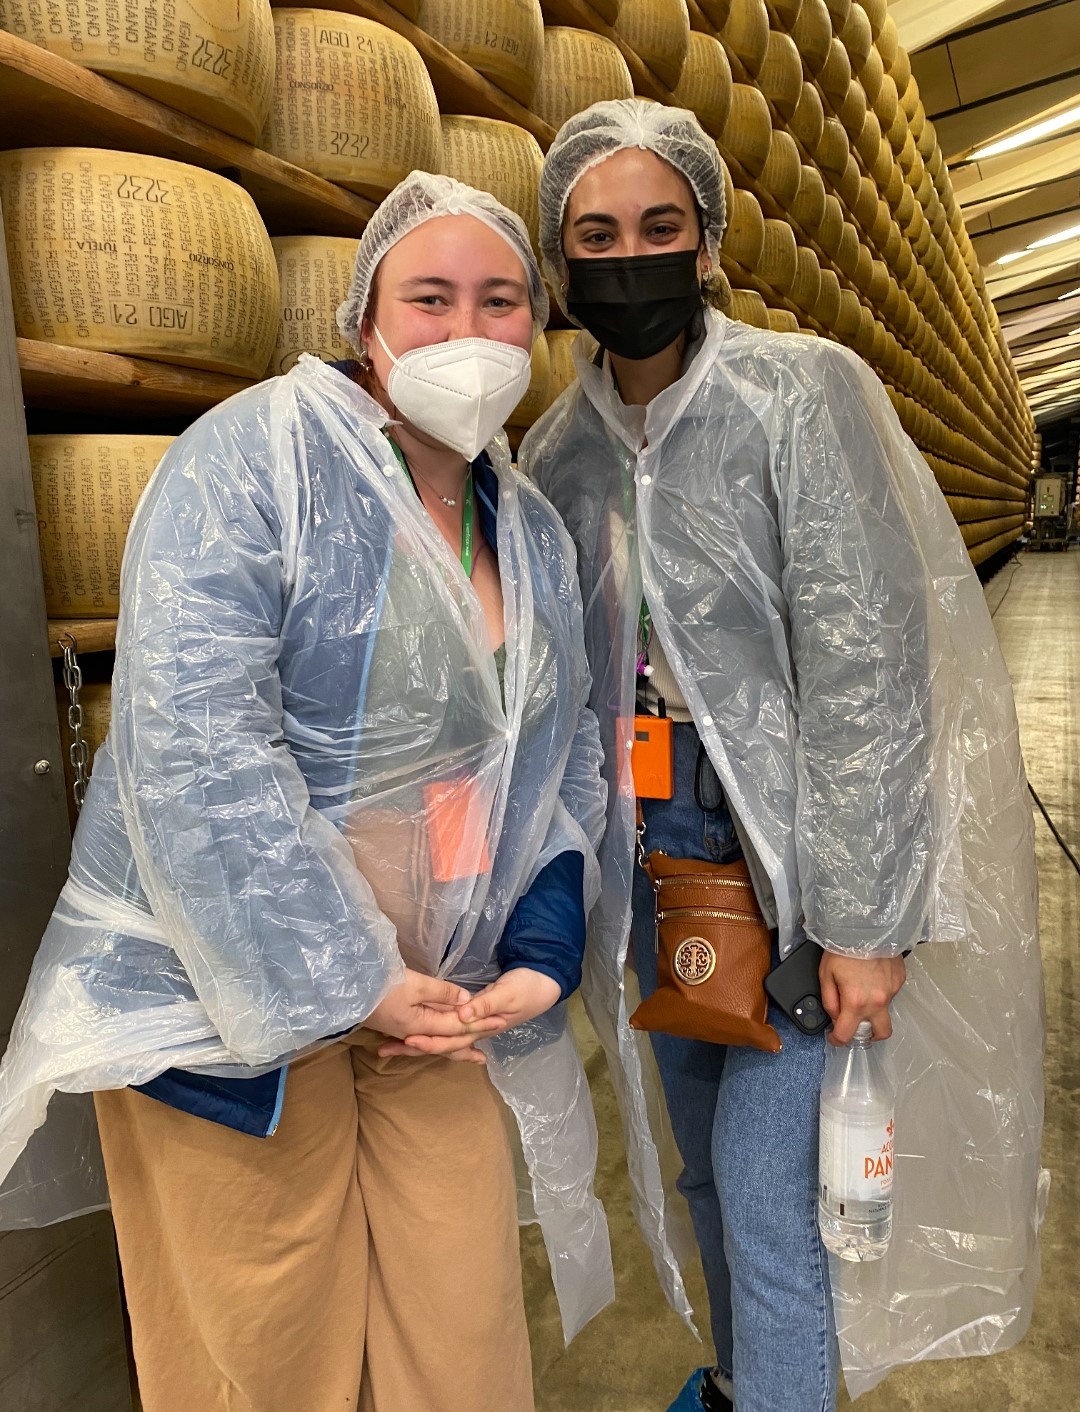 Alexandra with a classmate touring a Parmesan cheese facility in Italy